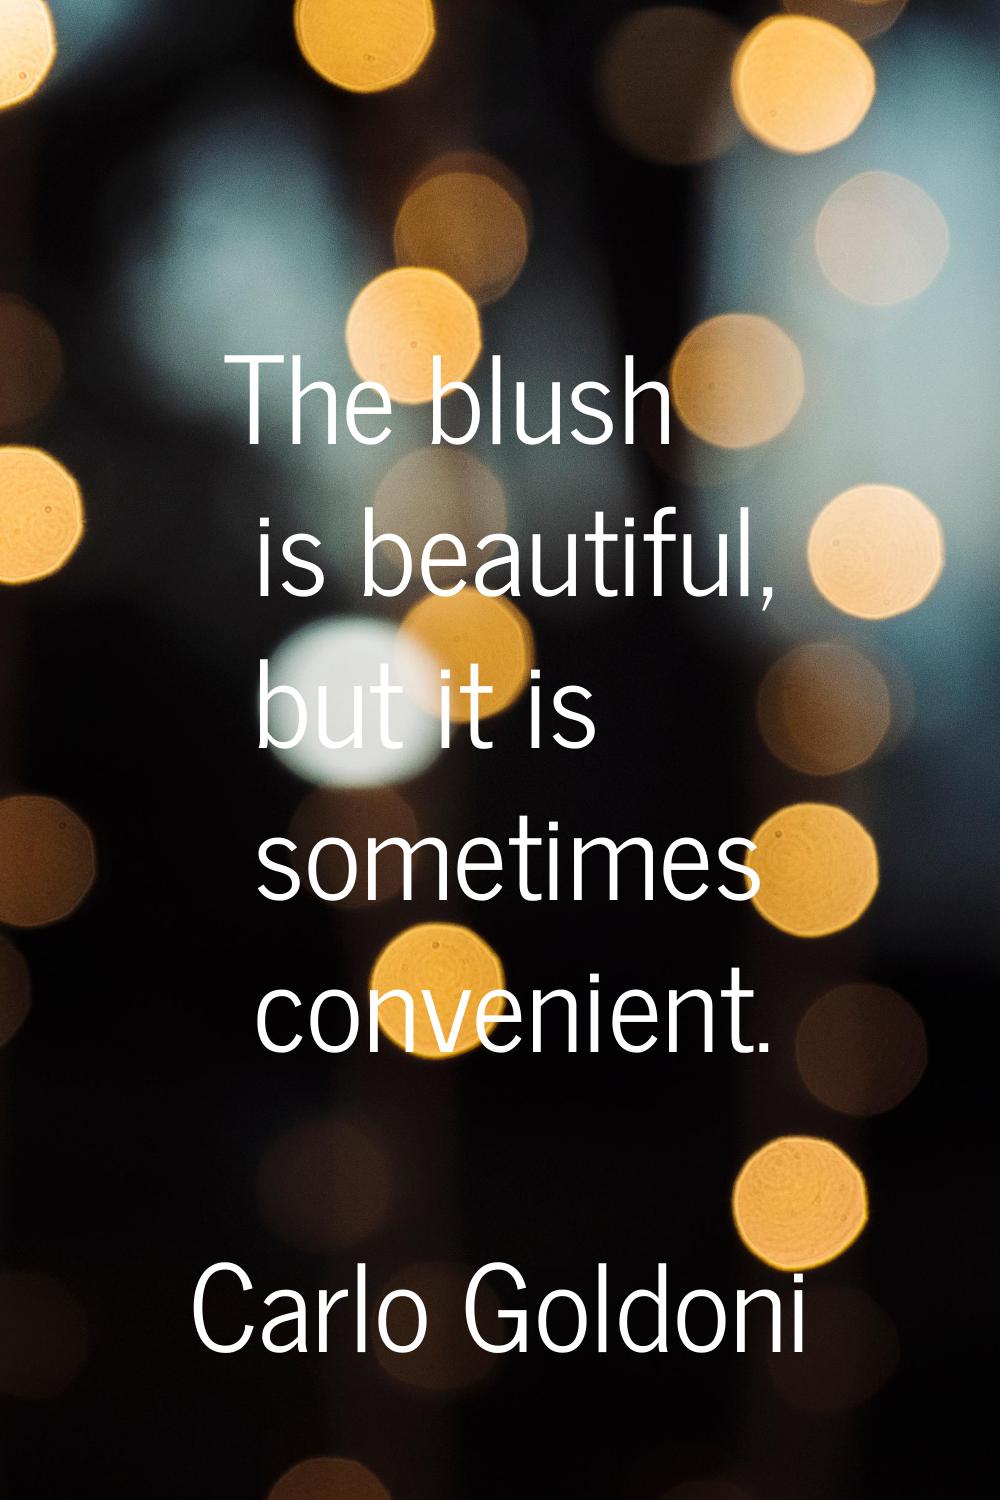 The blush is beautiful, but it is sometimes convenient.